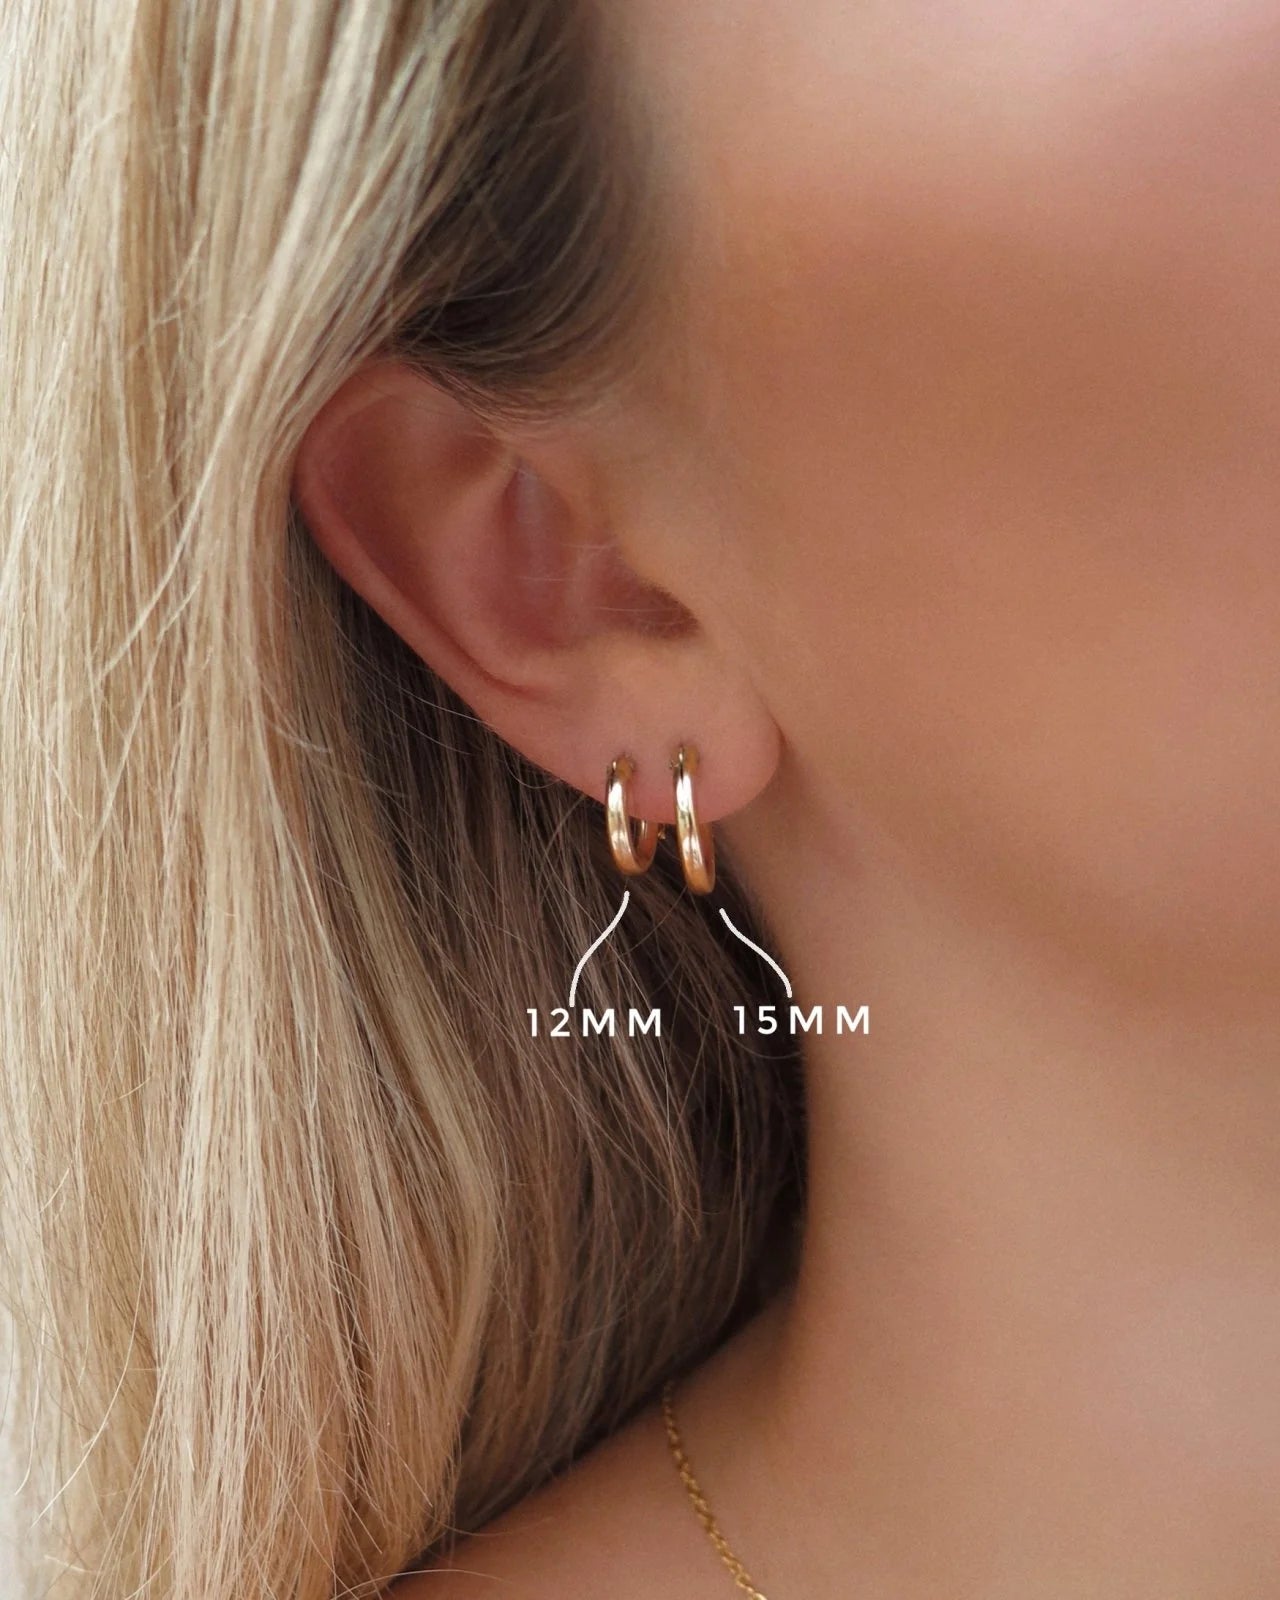 THICK HOOP EARRINGS - 14K YELLOW GOLD FILL ~ 12mm